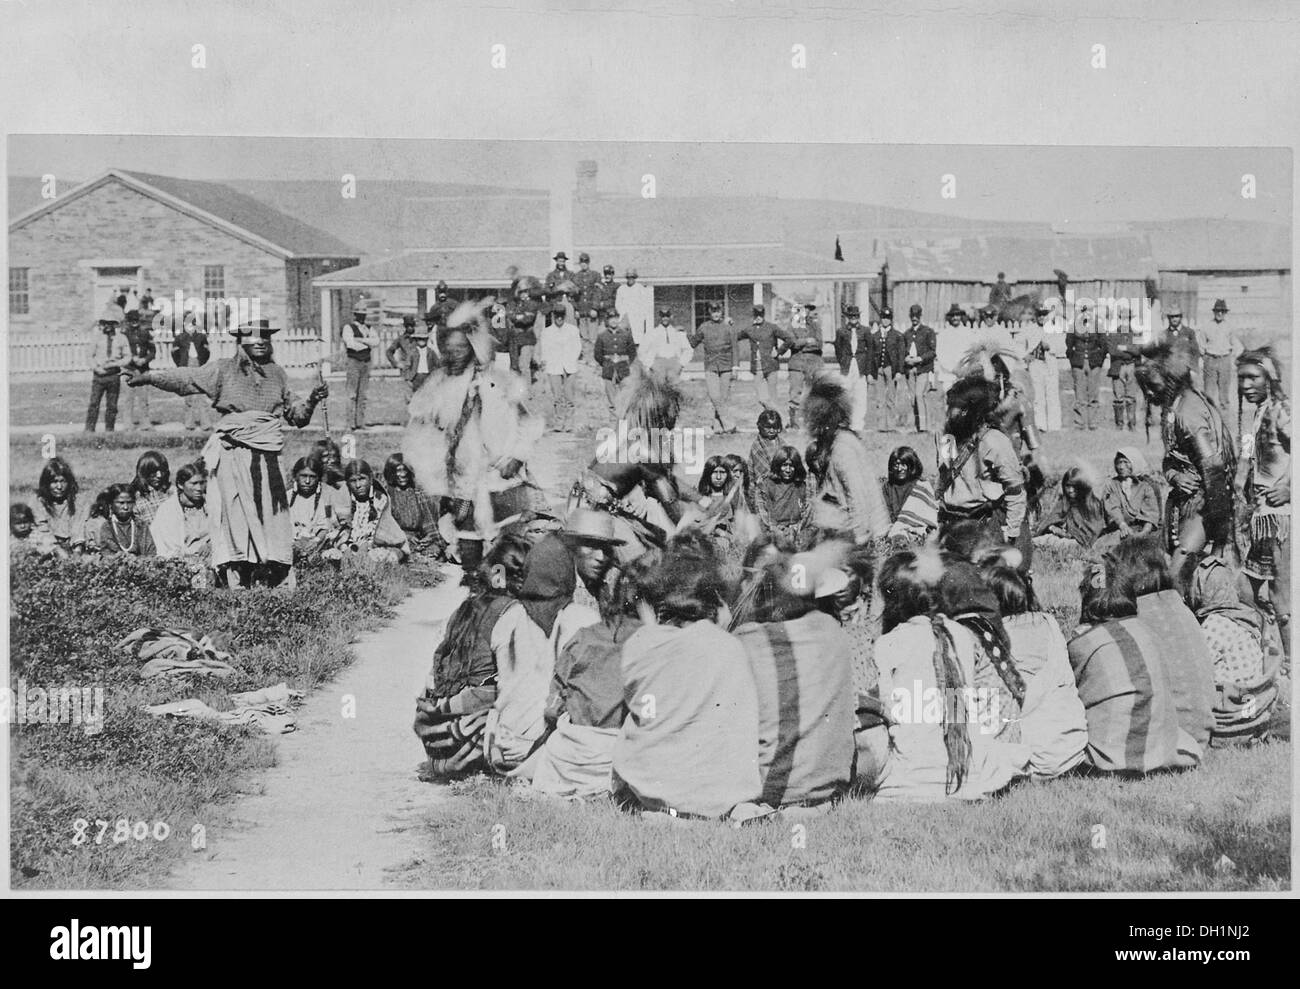 Shoshone Indians at Ft. Washakie, Wyoming Indian reservation .. . Chief Washakie (at left) extends his right arm, 1892 530919 Stock Photo